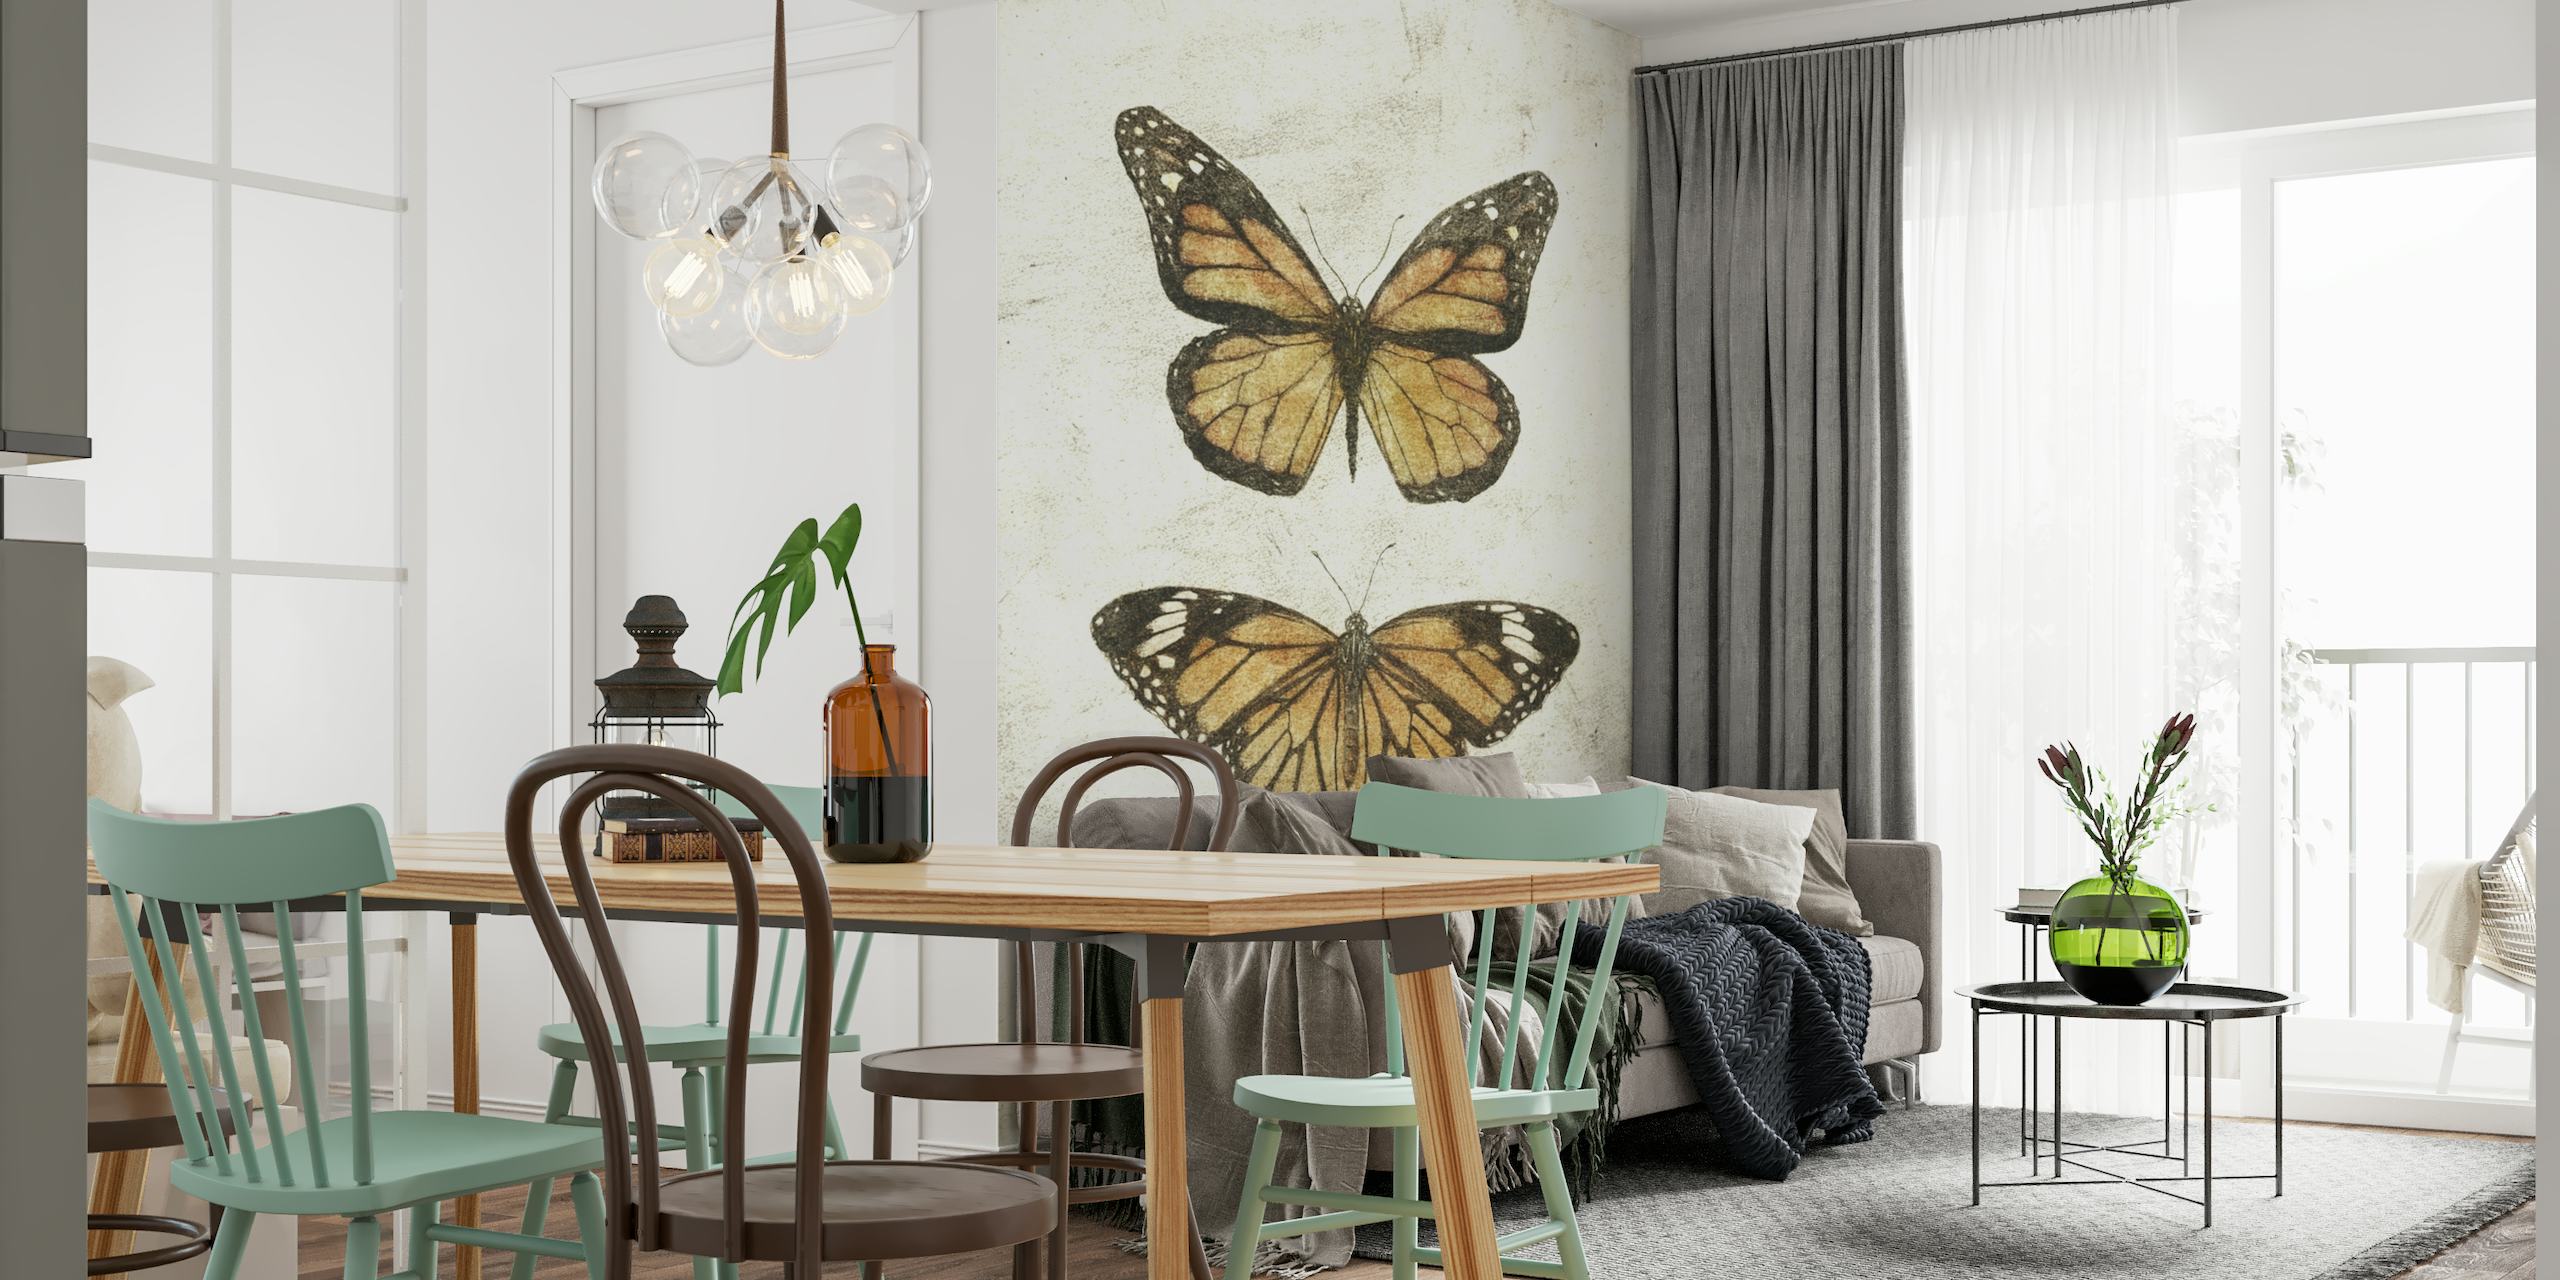 Butterflies II wall mural with two vintage-styled butterflies on a natural textured background